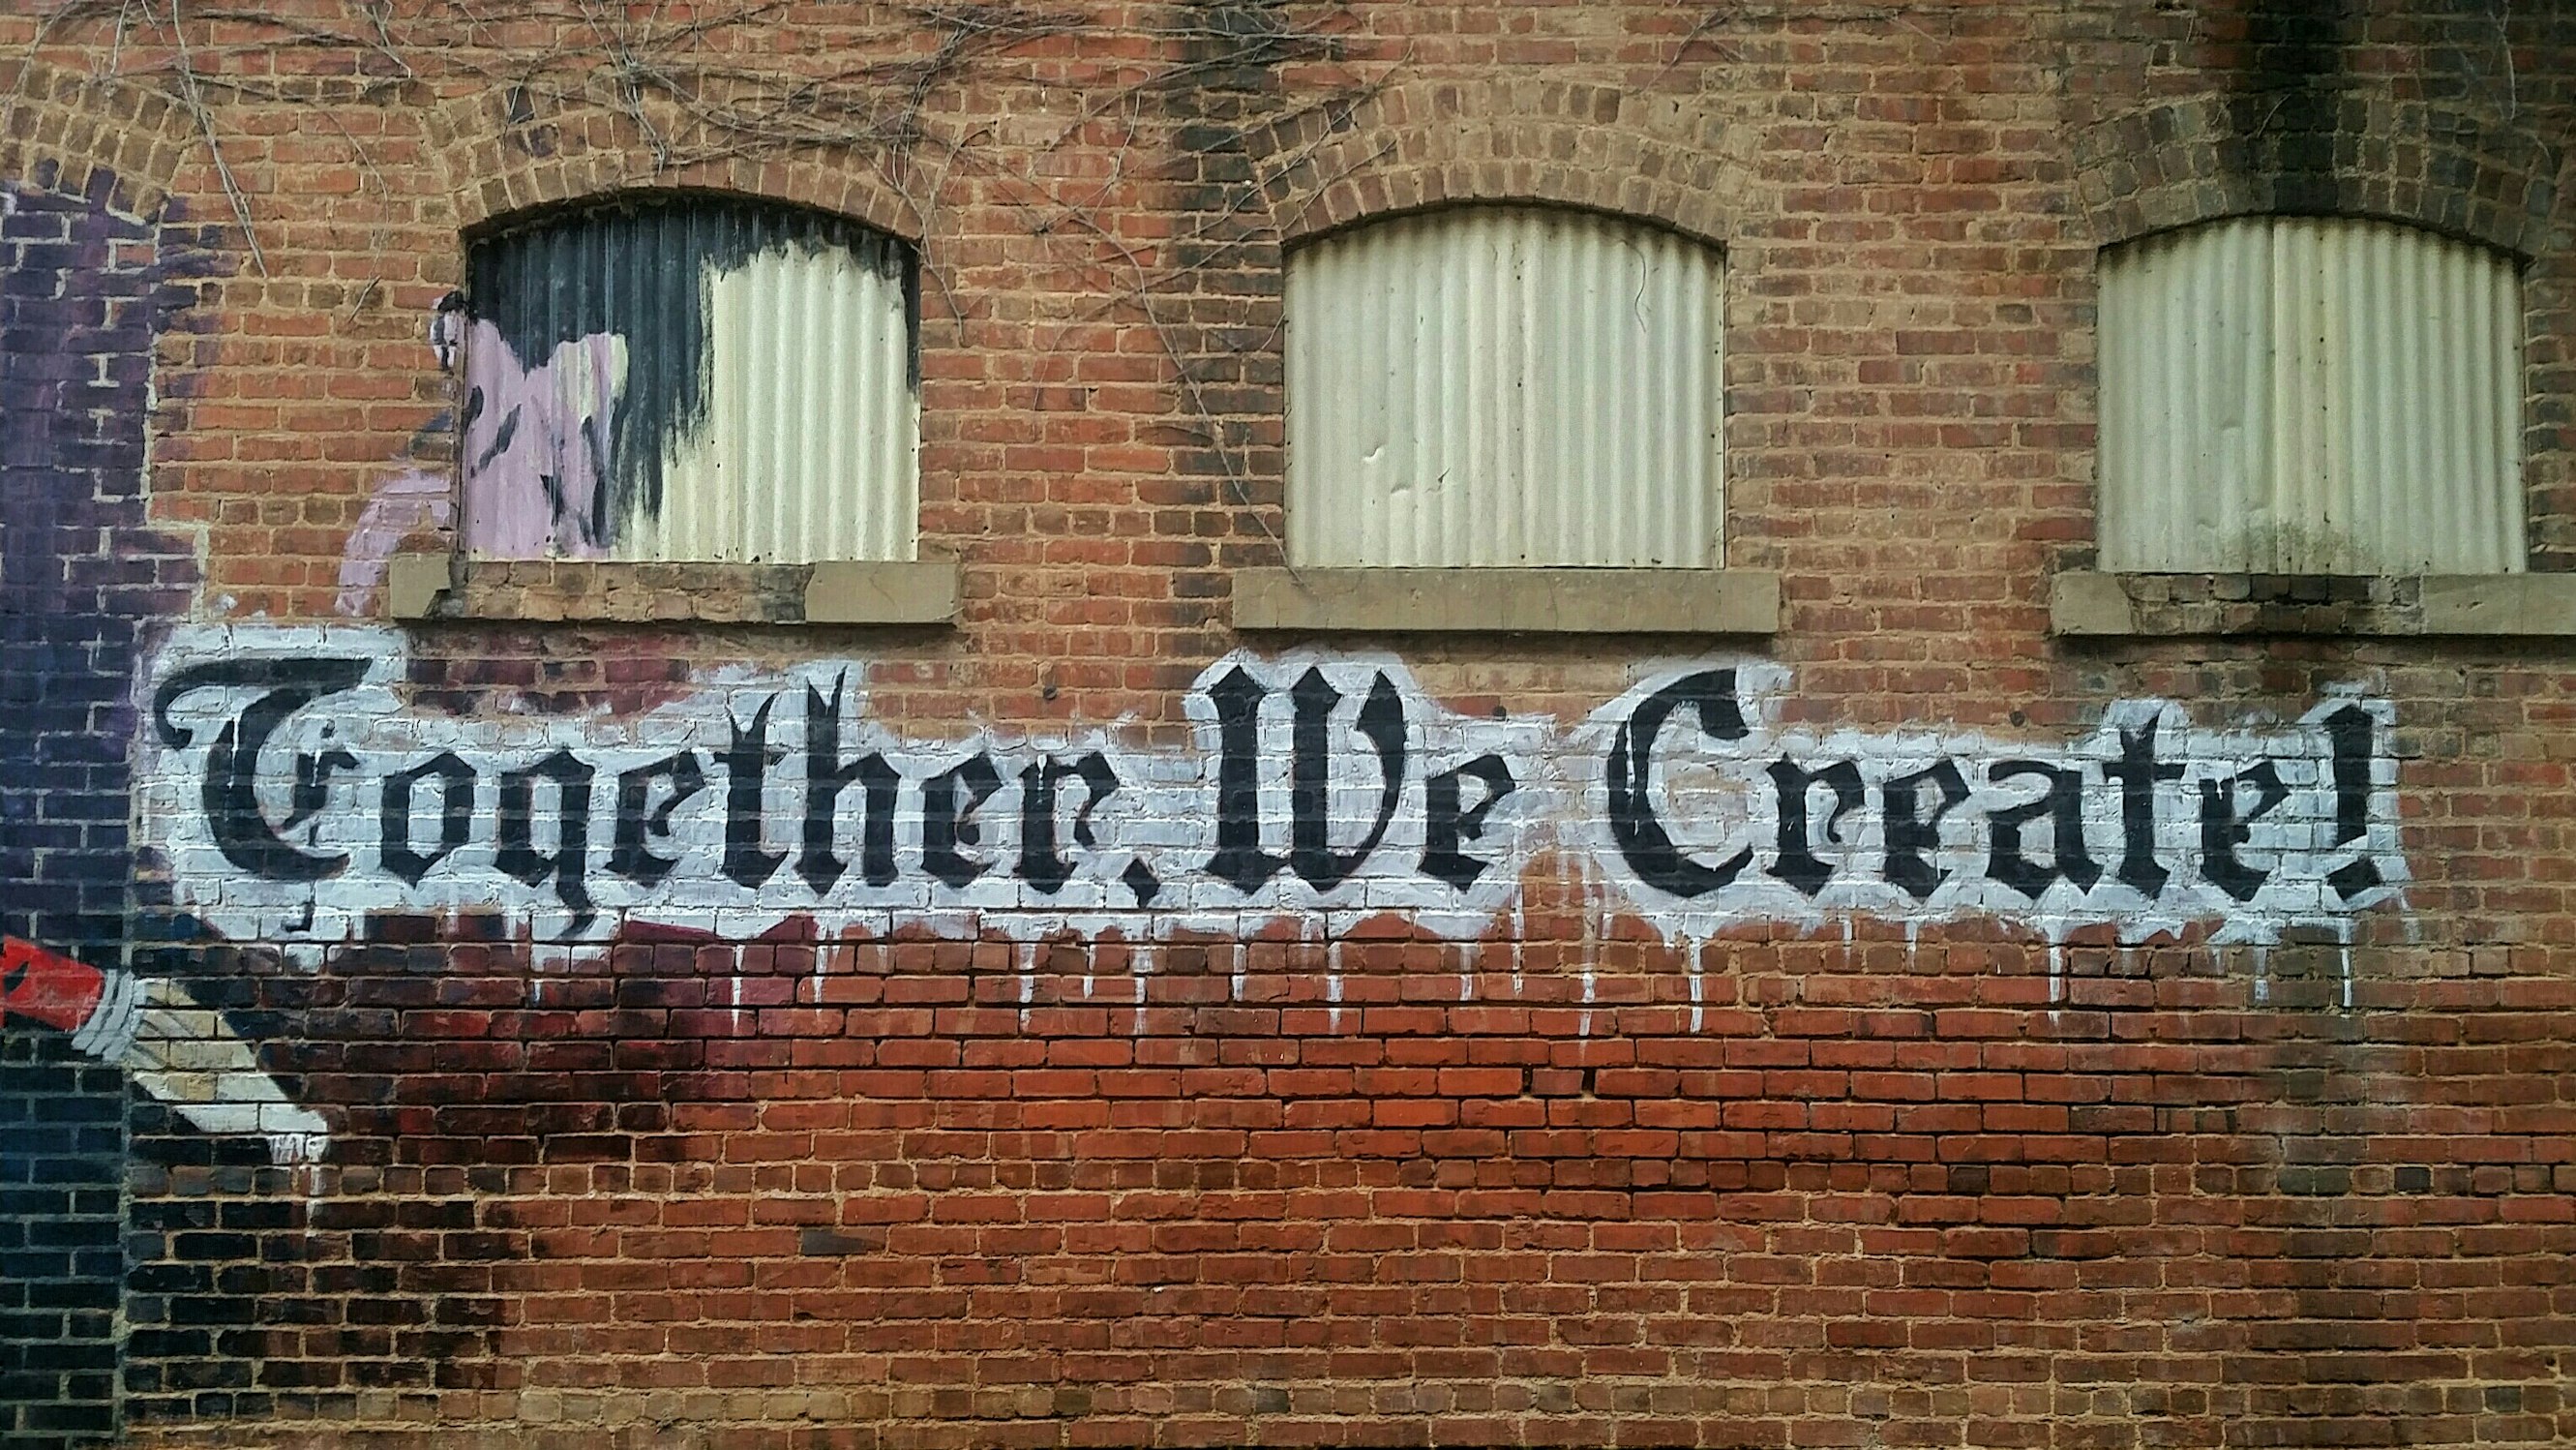 "Together we create" graffiti on wall in black and white paint. Photo by user bamagal